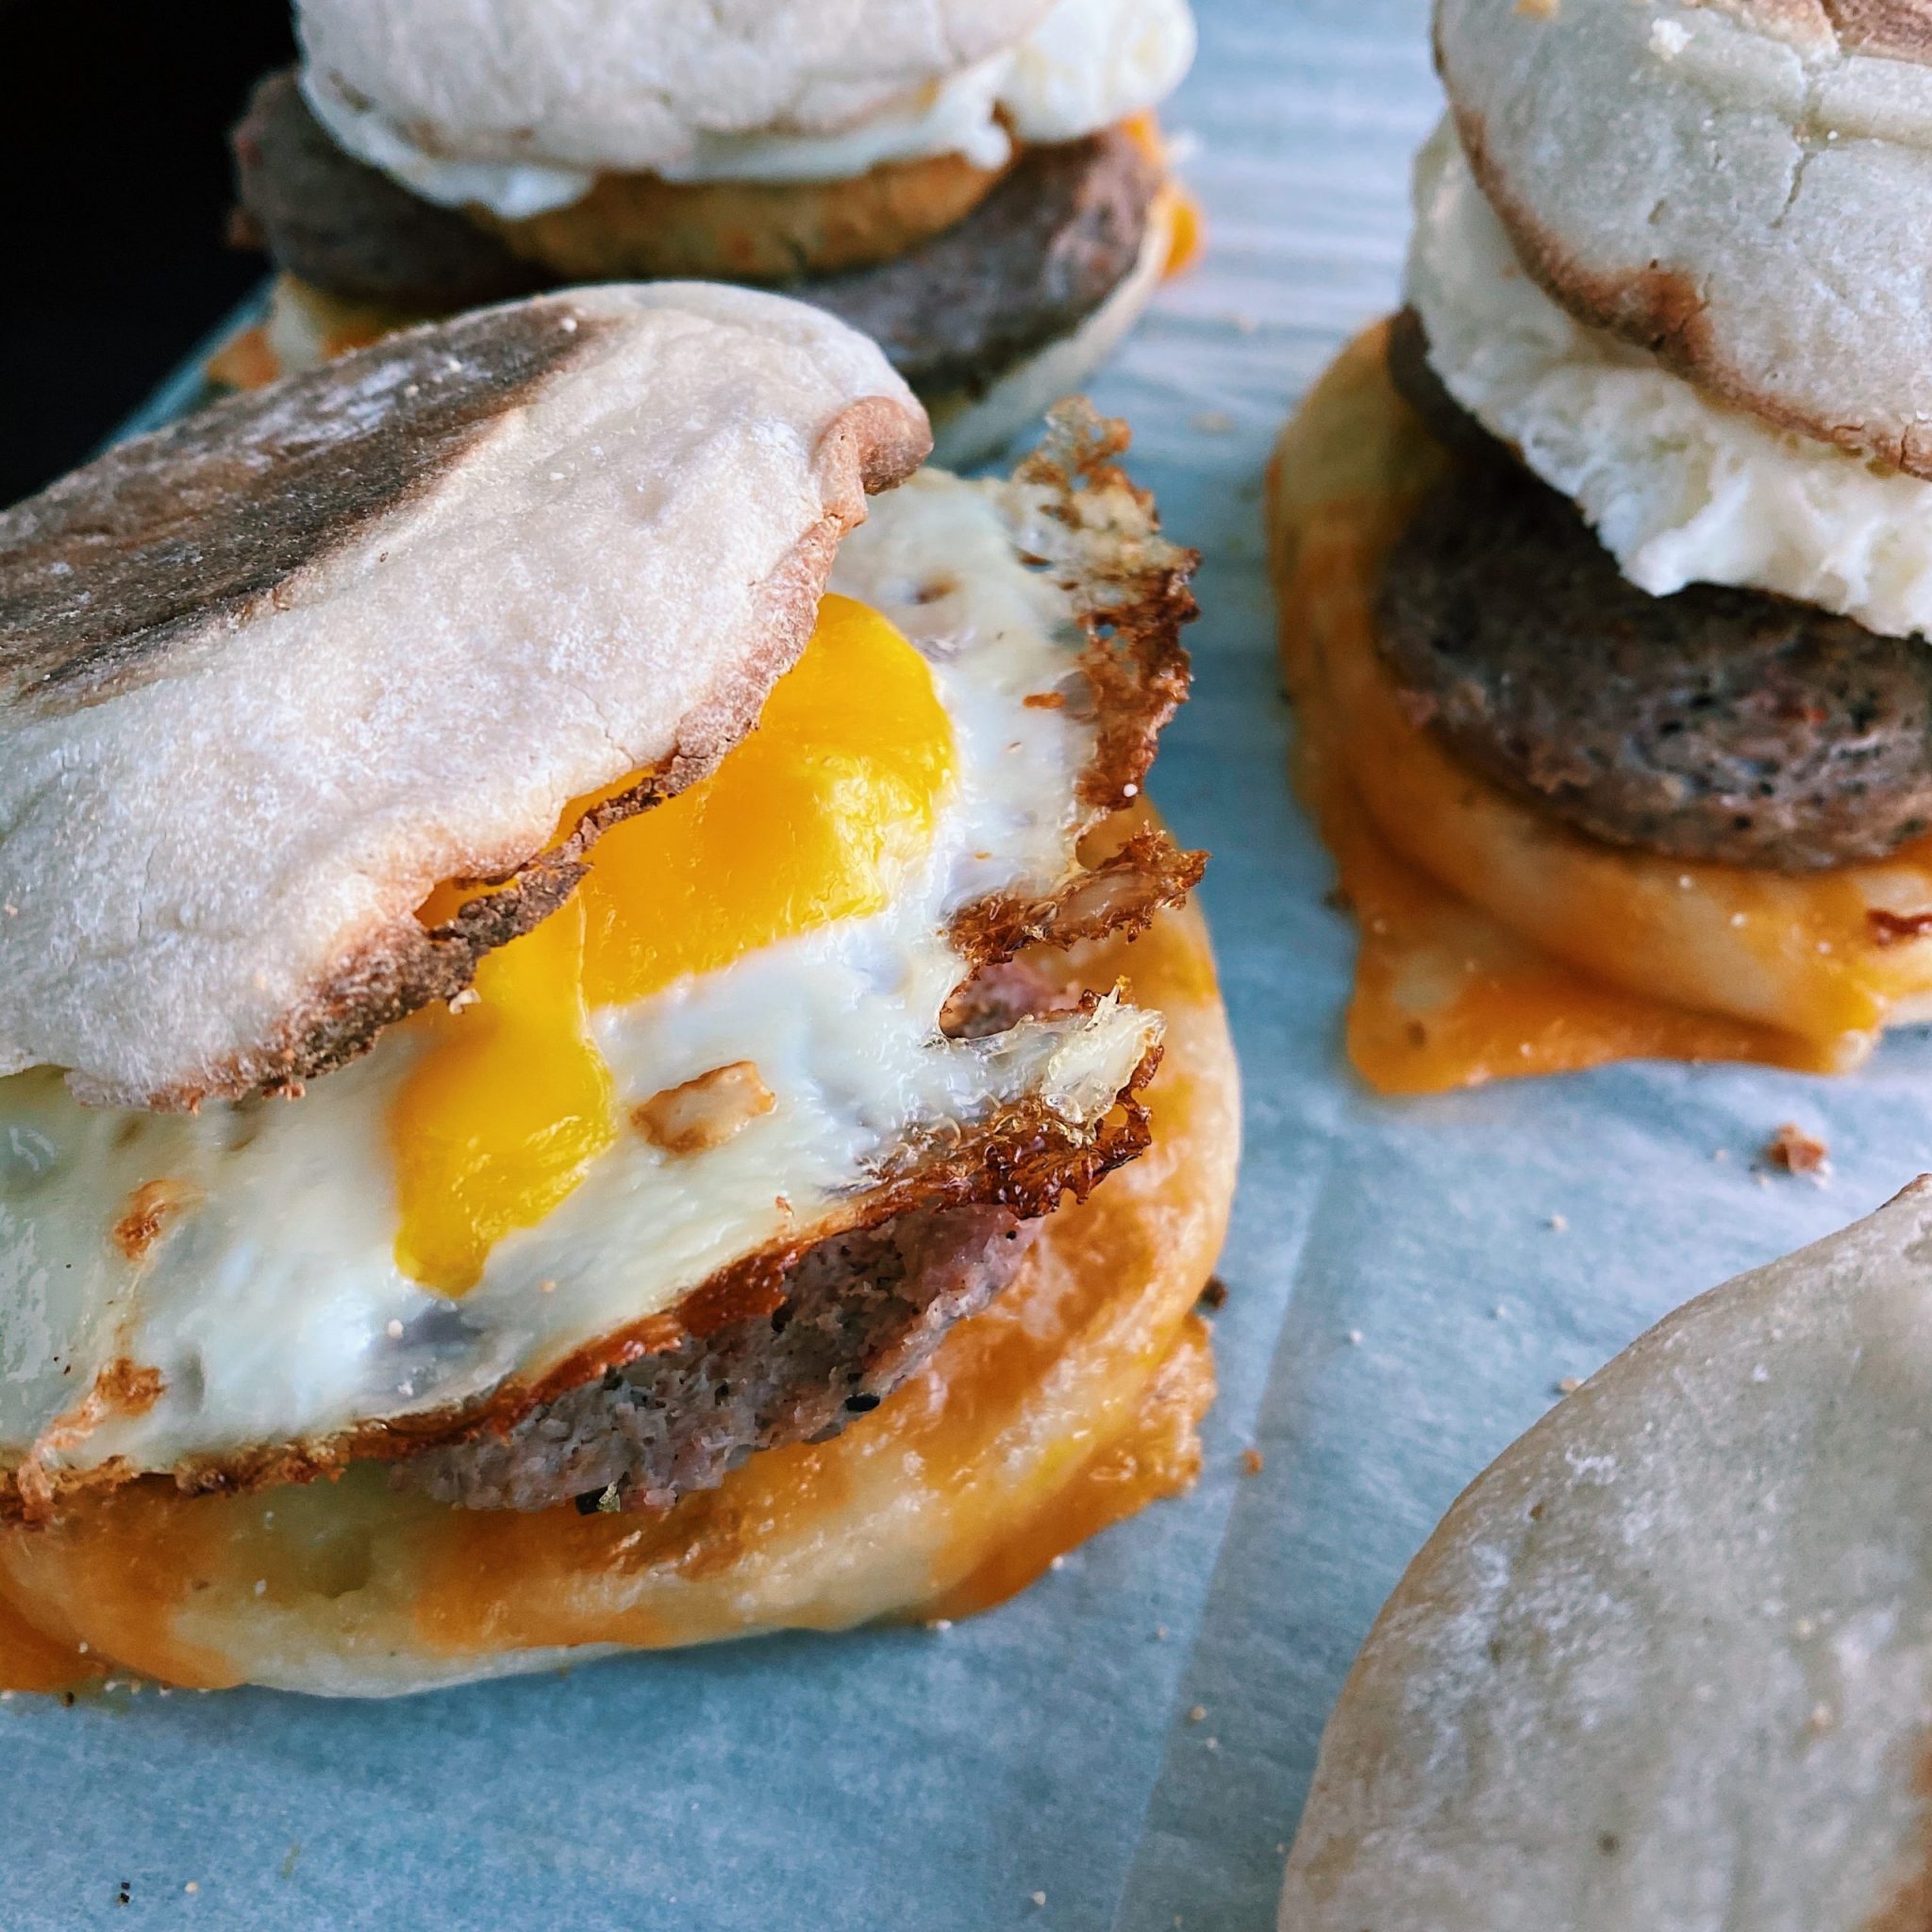 Showcasing image of stacked breakfast sandwich, especially the crispy fried egg edges